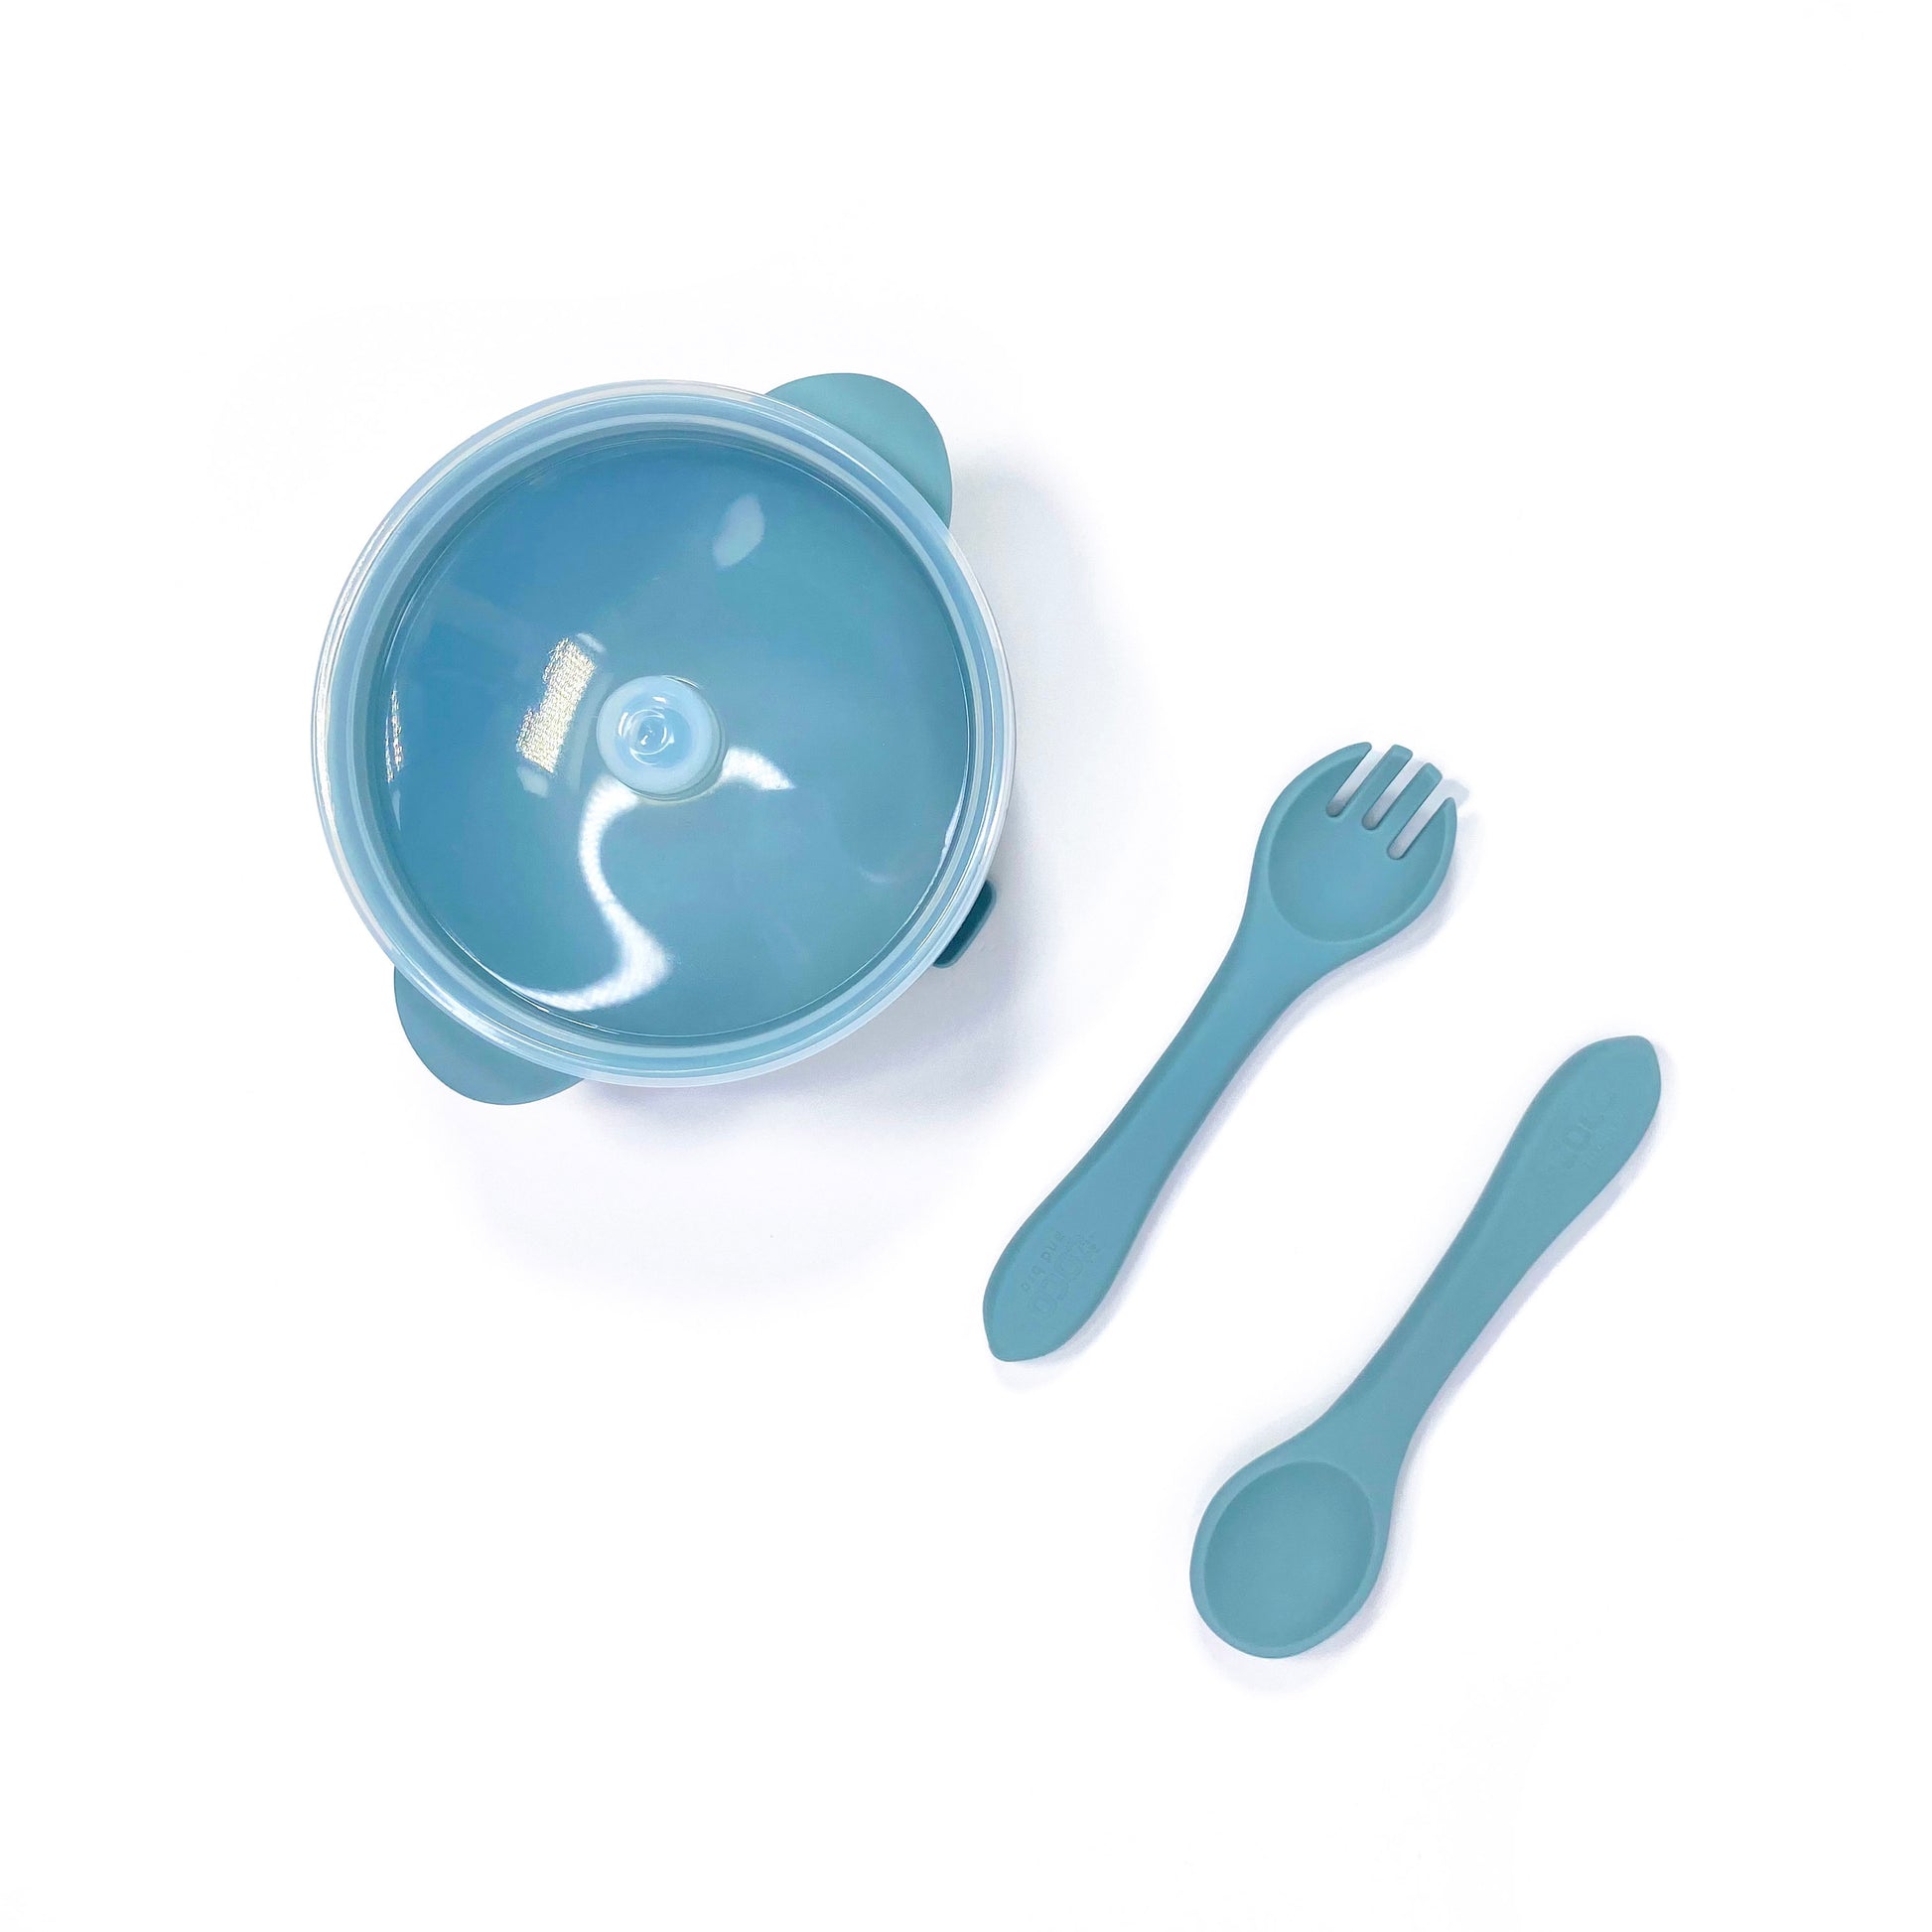 A sky blue silicone children’s feeding set, including silicone bowl with lid and matching silicone cutlery. Image shows the bowl and cutlery from above, with lid attached.